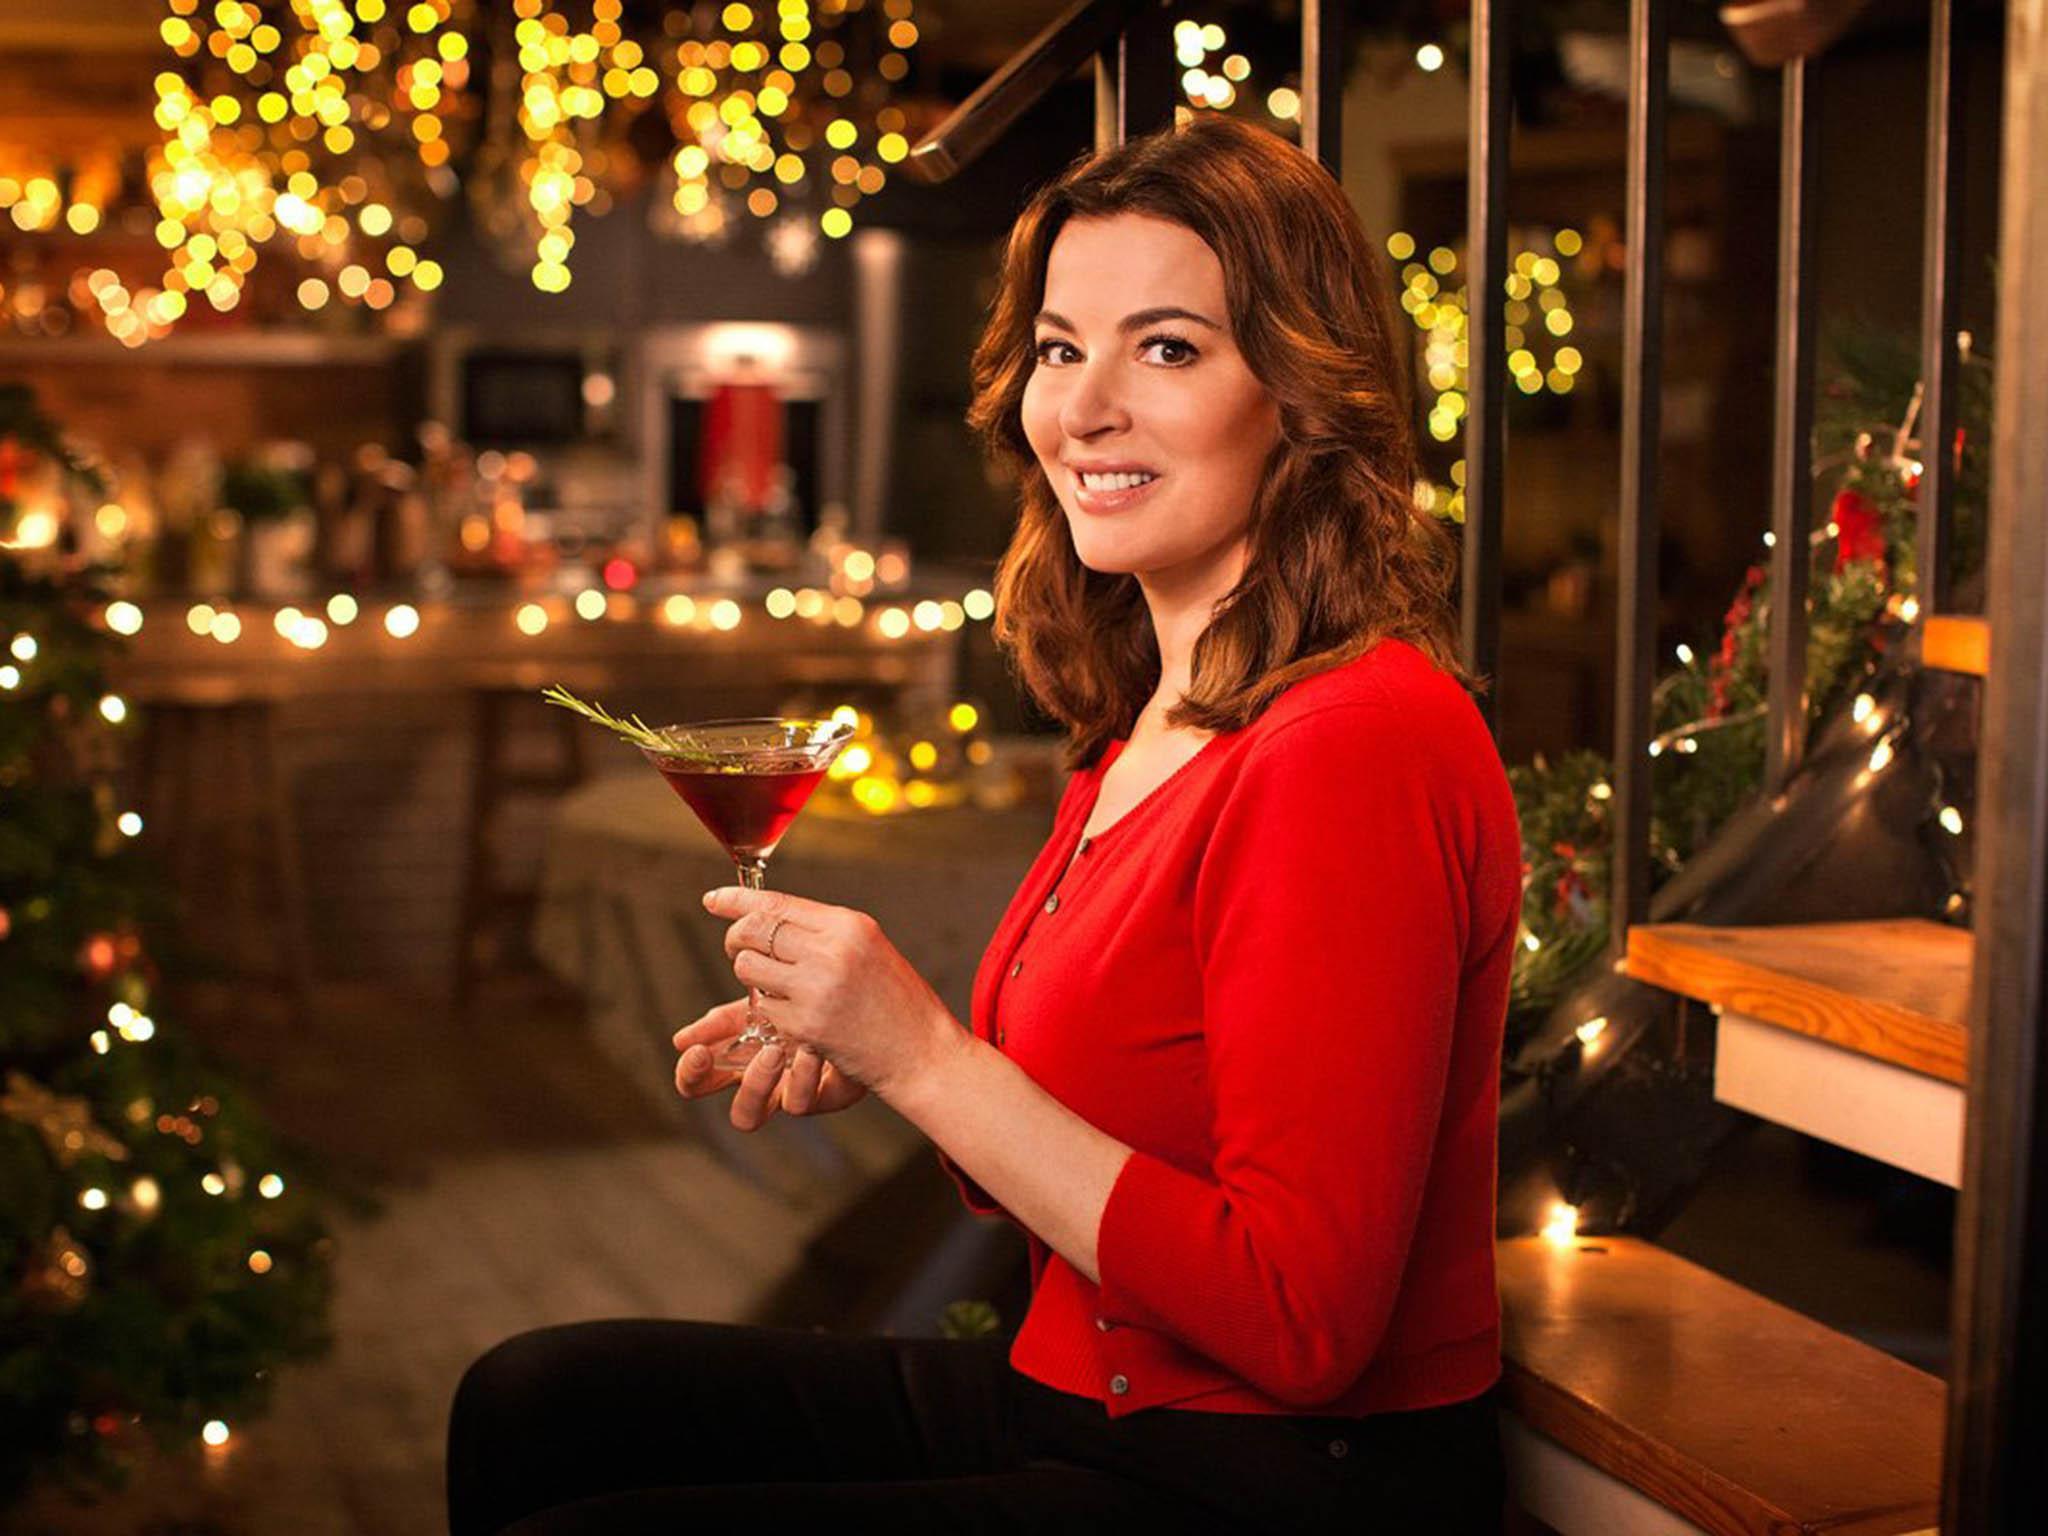 The kitchen queen is back. Nigella's lastest book is full of recipes that are for sharing